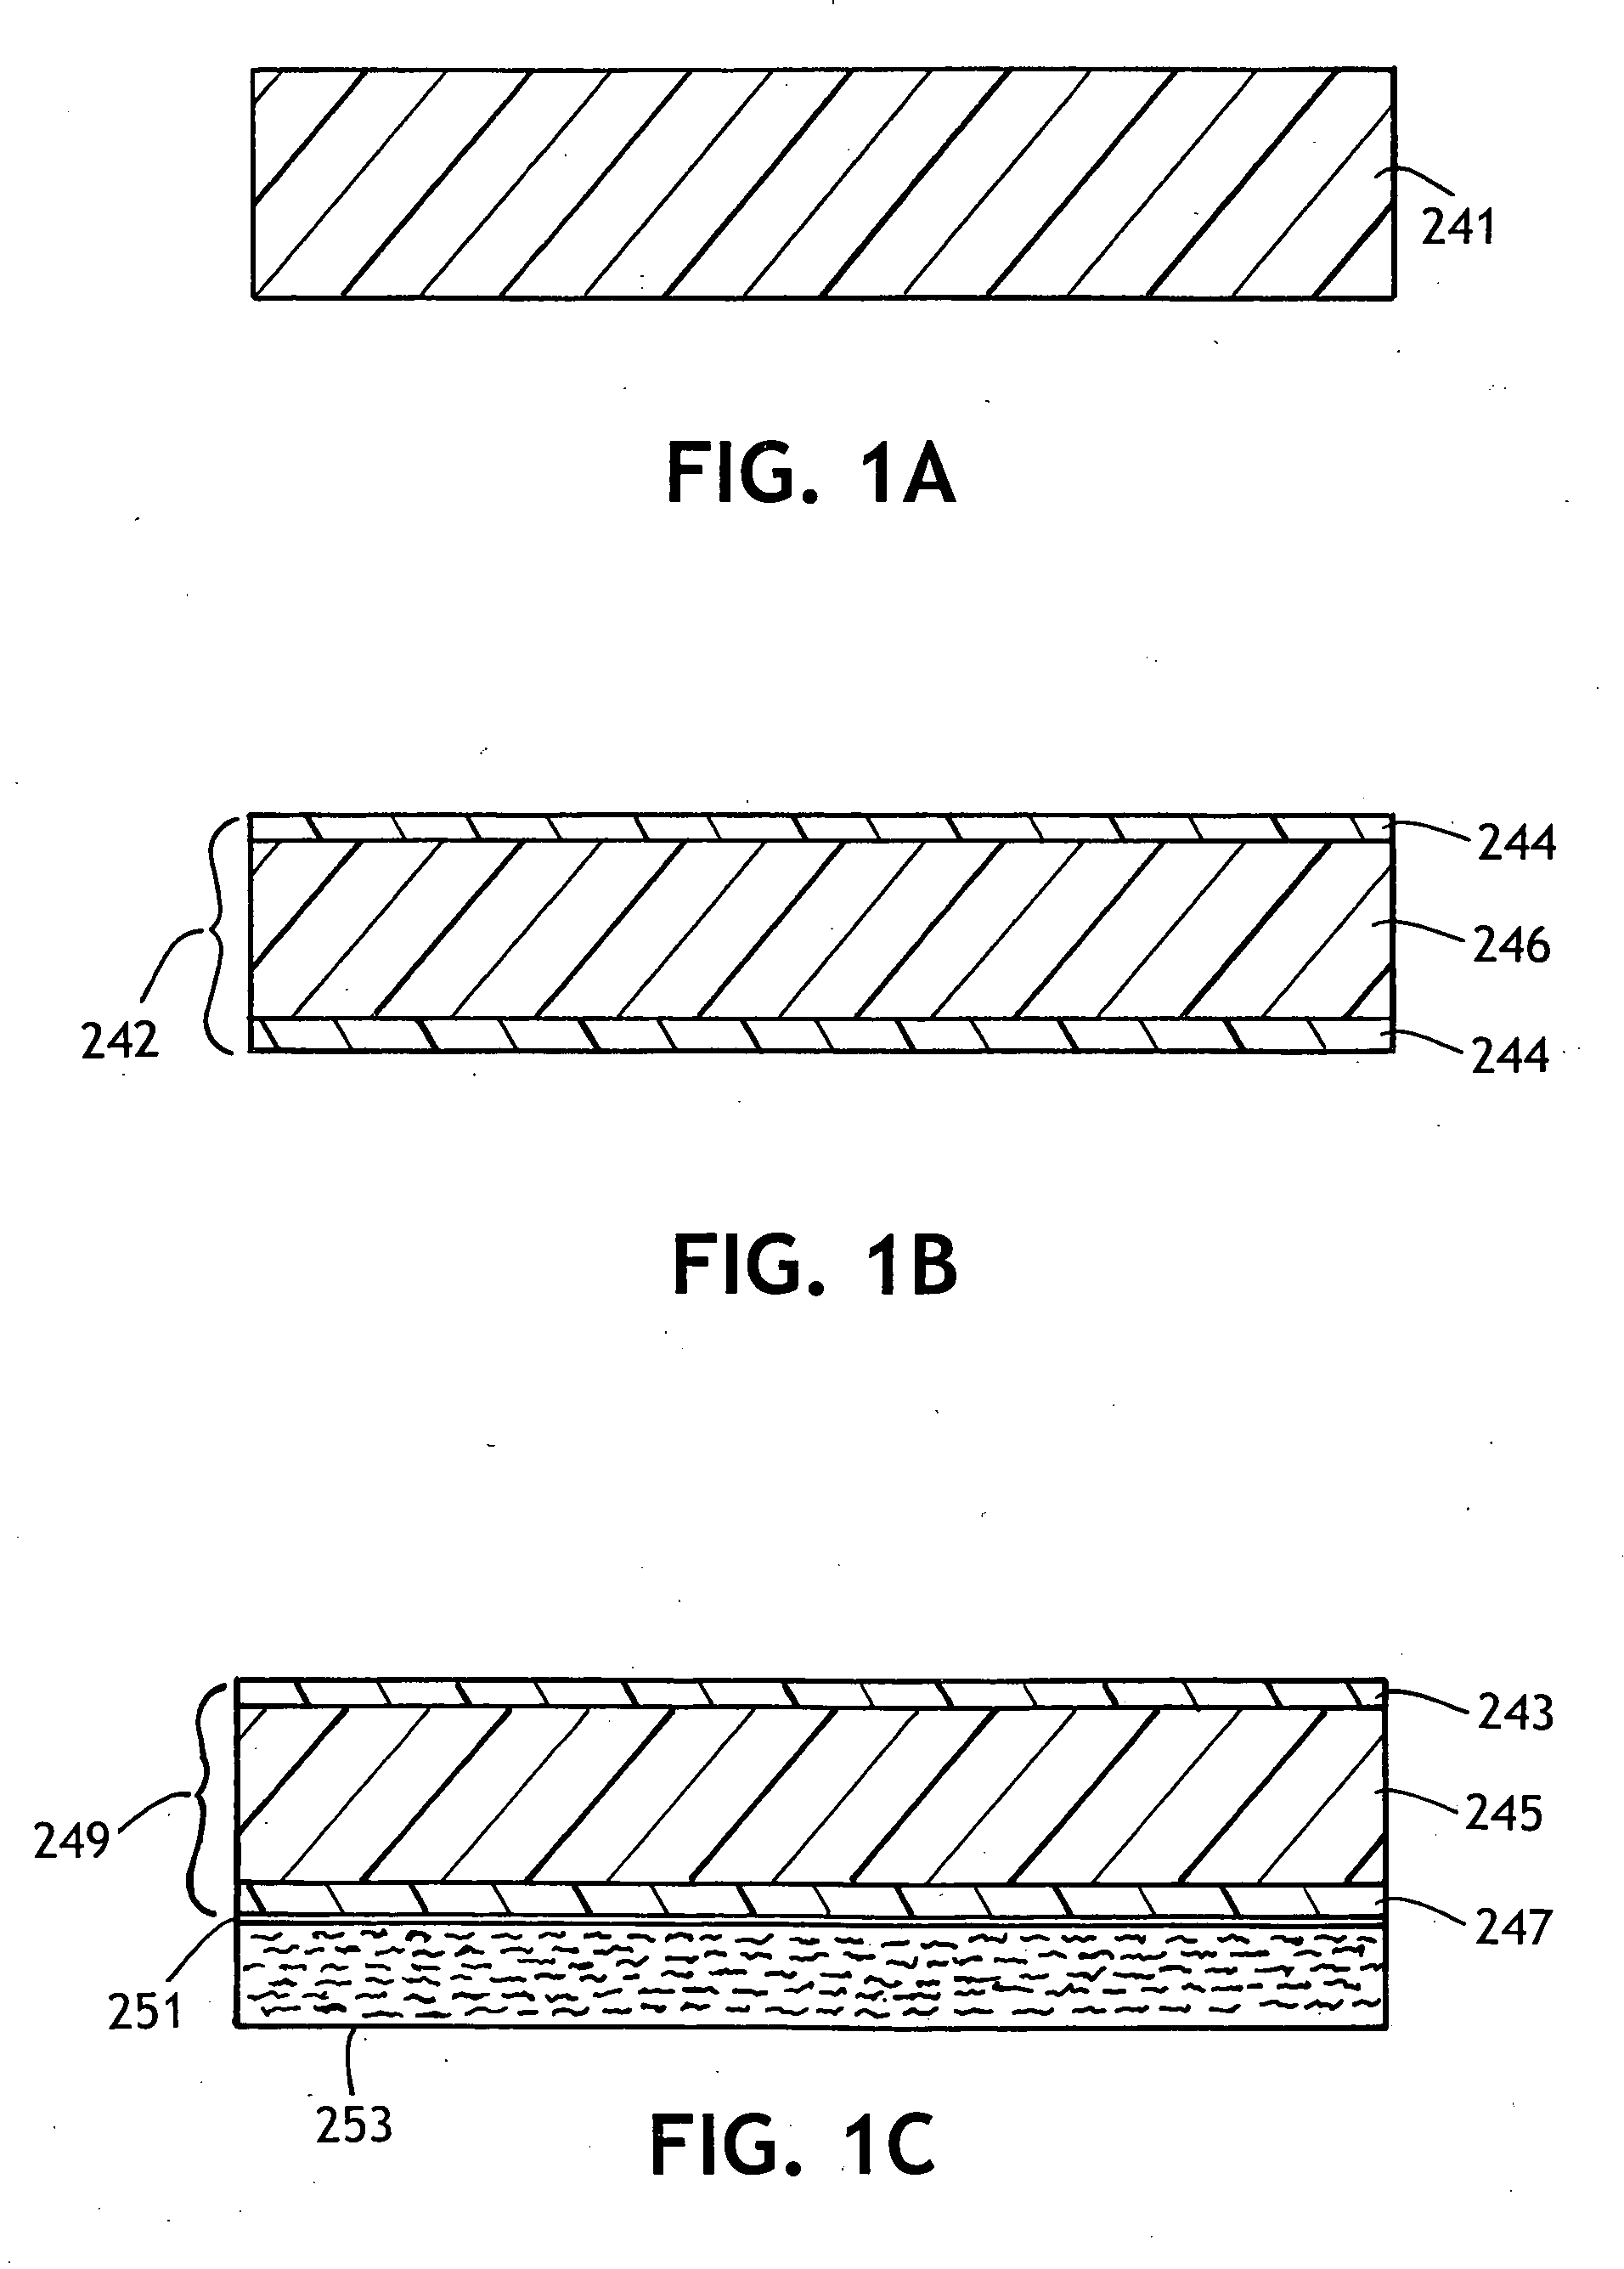 Elastic films with reduced roll blocking capability, methods of making same, and limited use or disposable product applications incorporating same